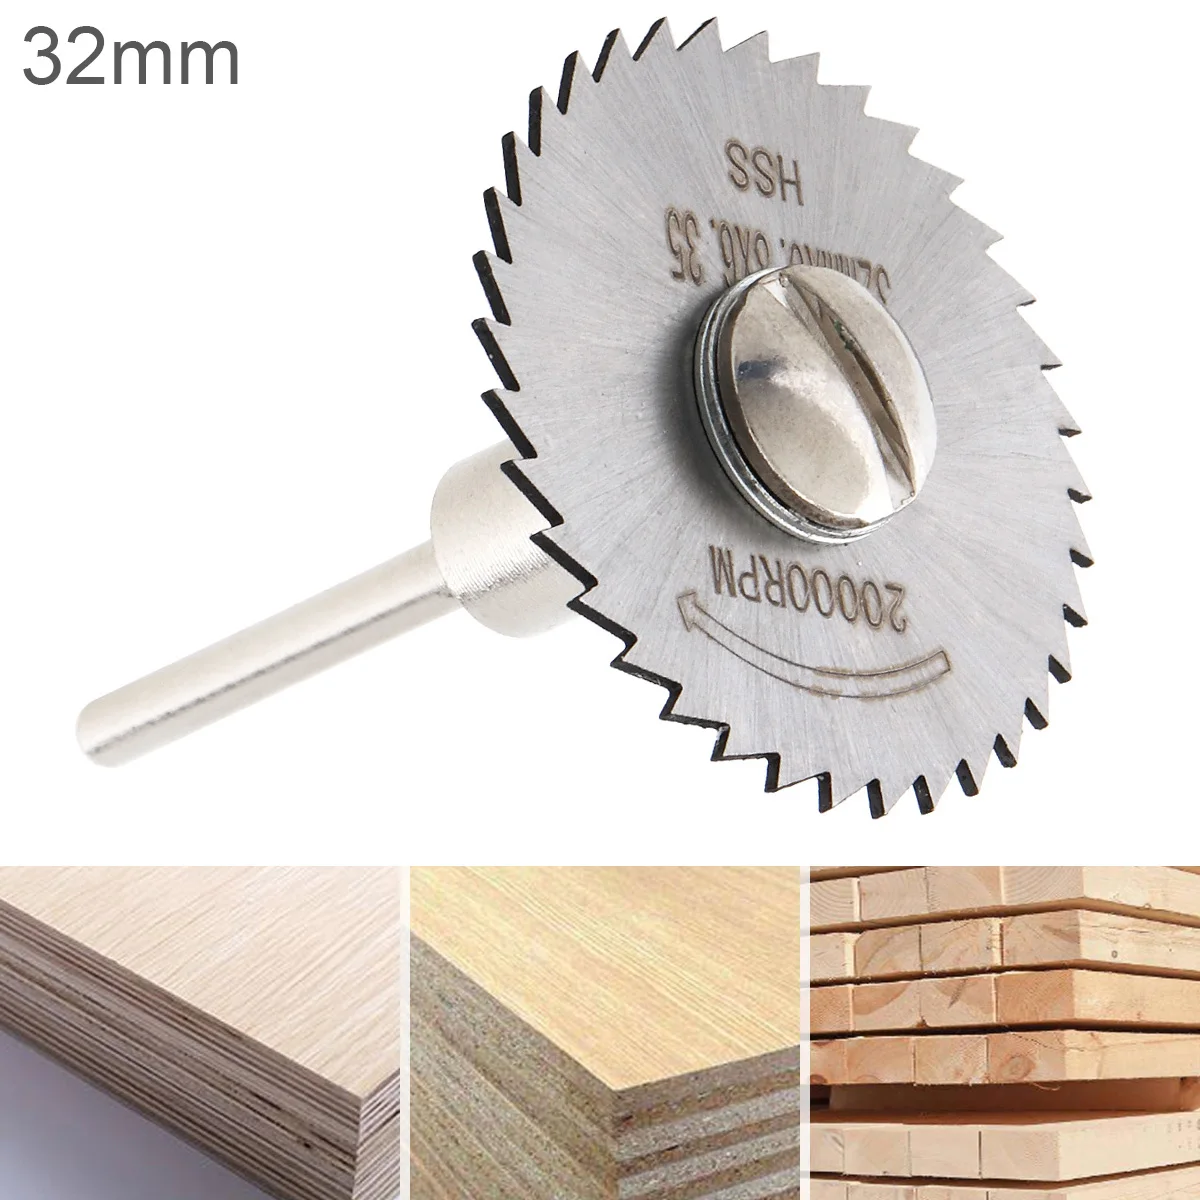 

32mm HSS Multifunctional Mini Saw Blade Mandrel Cutting Disc Blade and Circular Blade With Connecting Rod for Home DIY Cutting